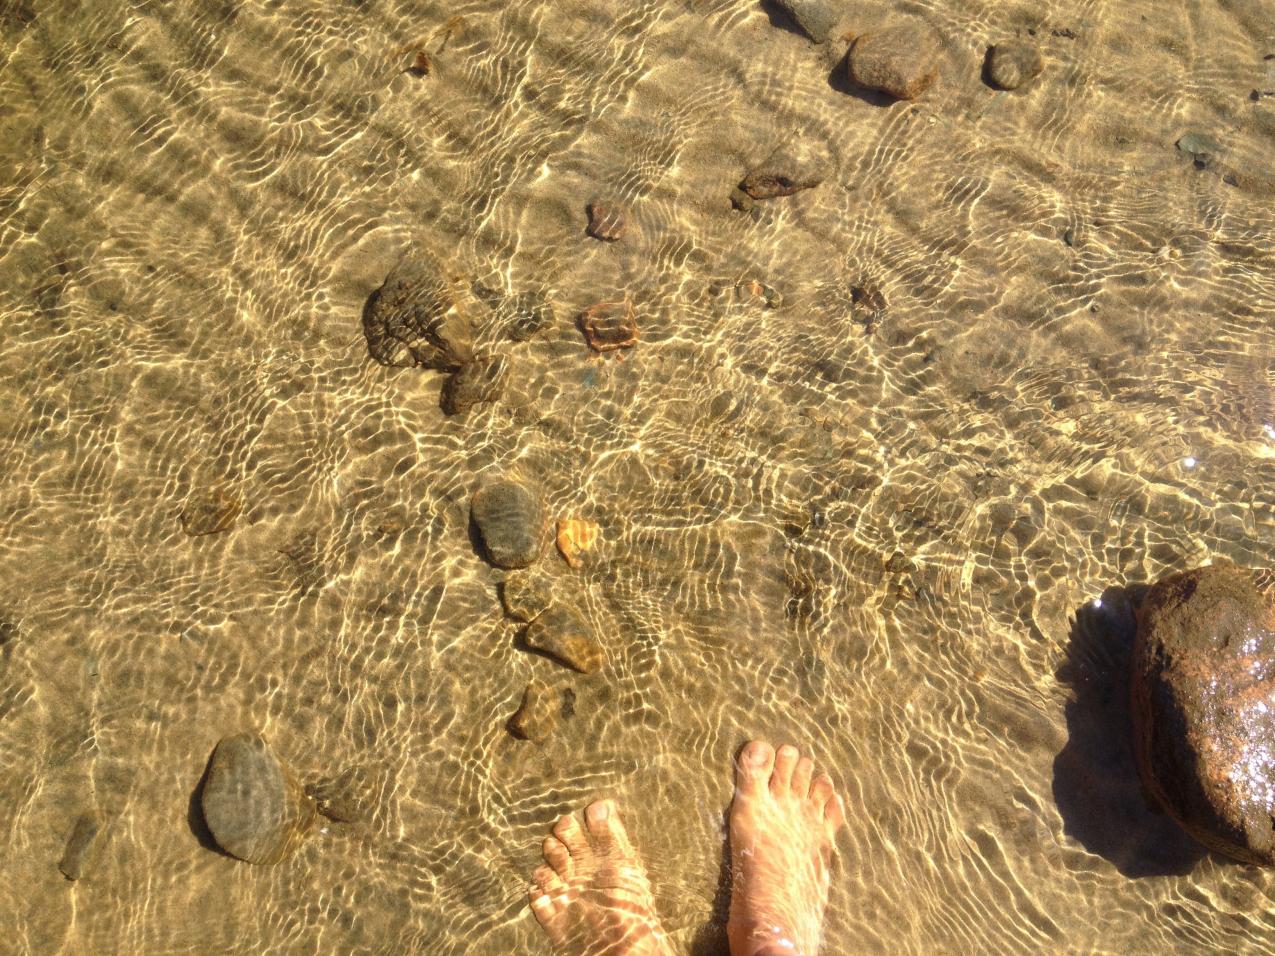 Water and sand, bare feet in the water.